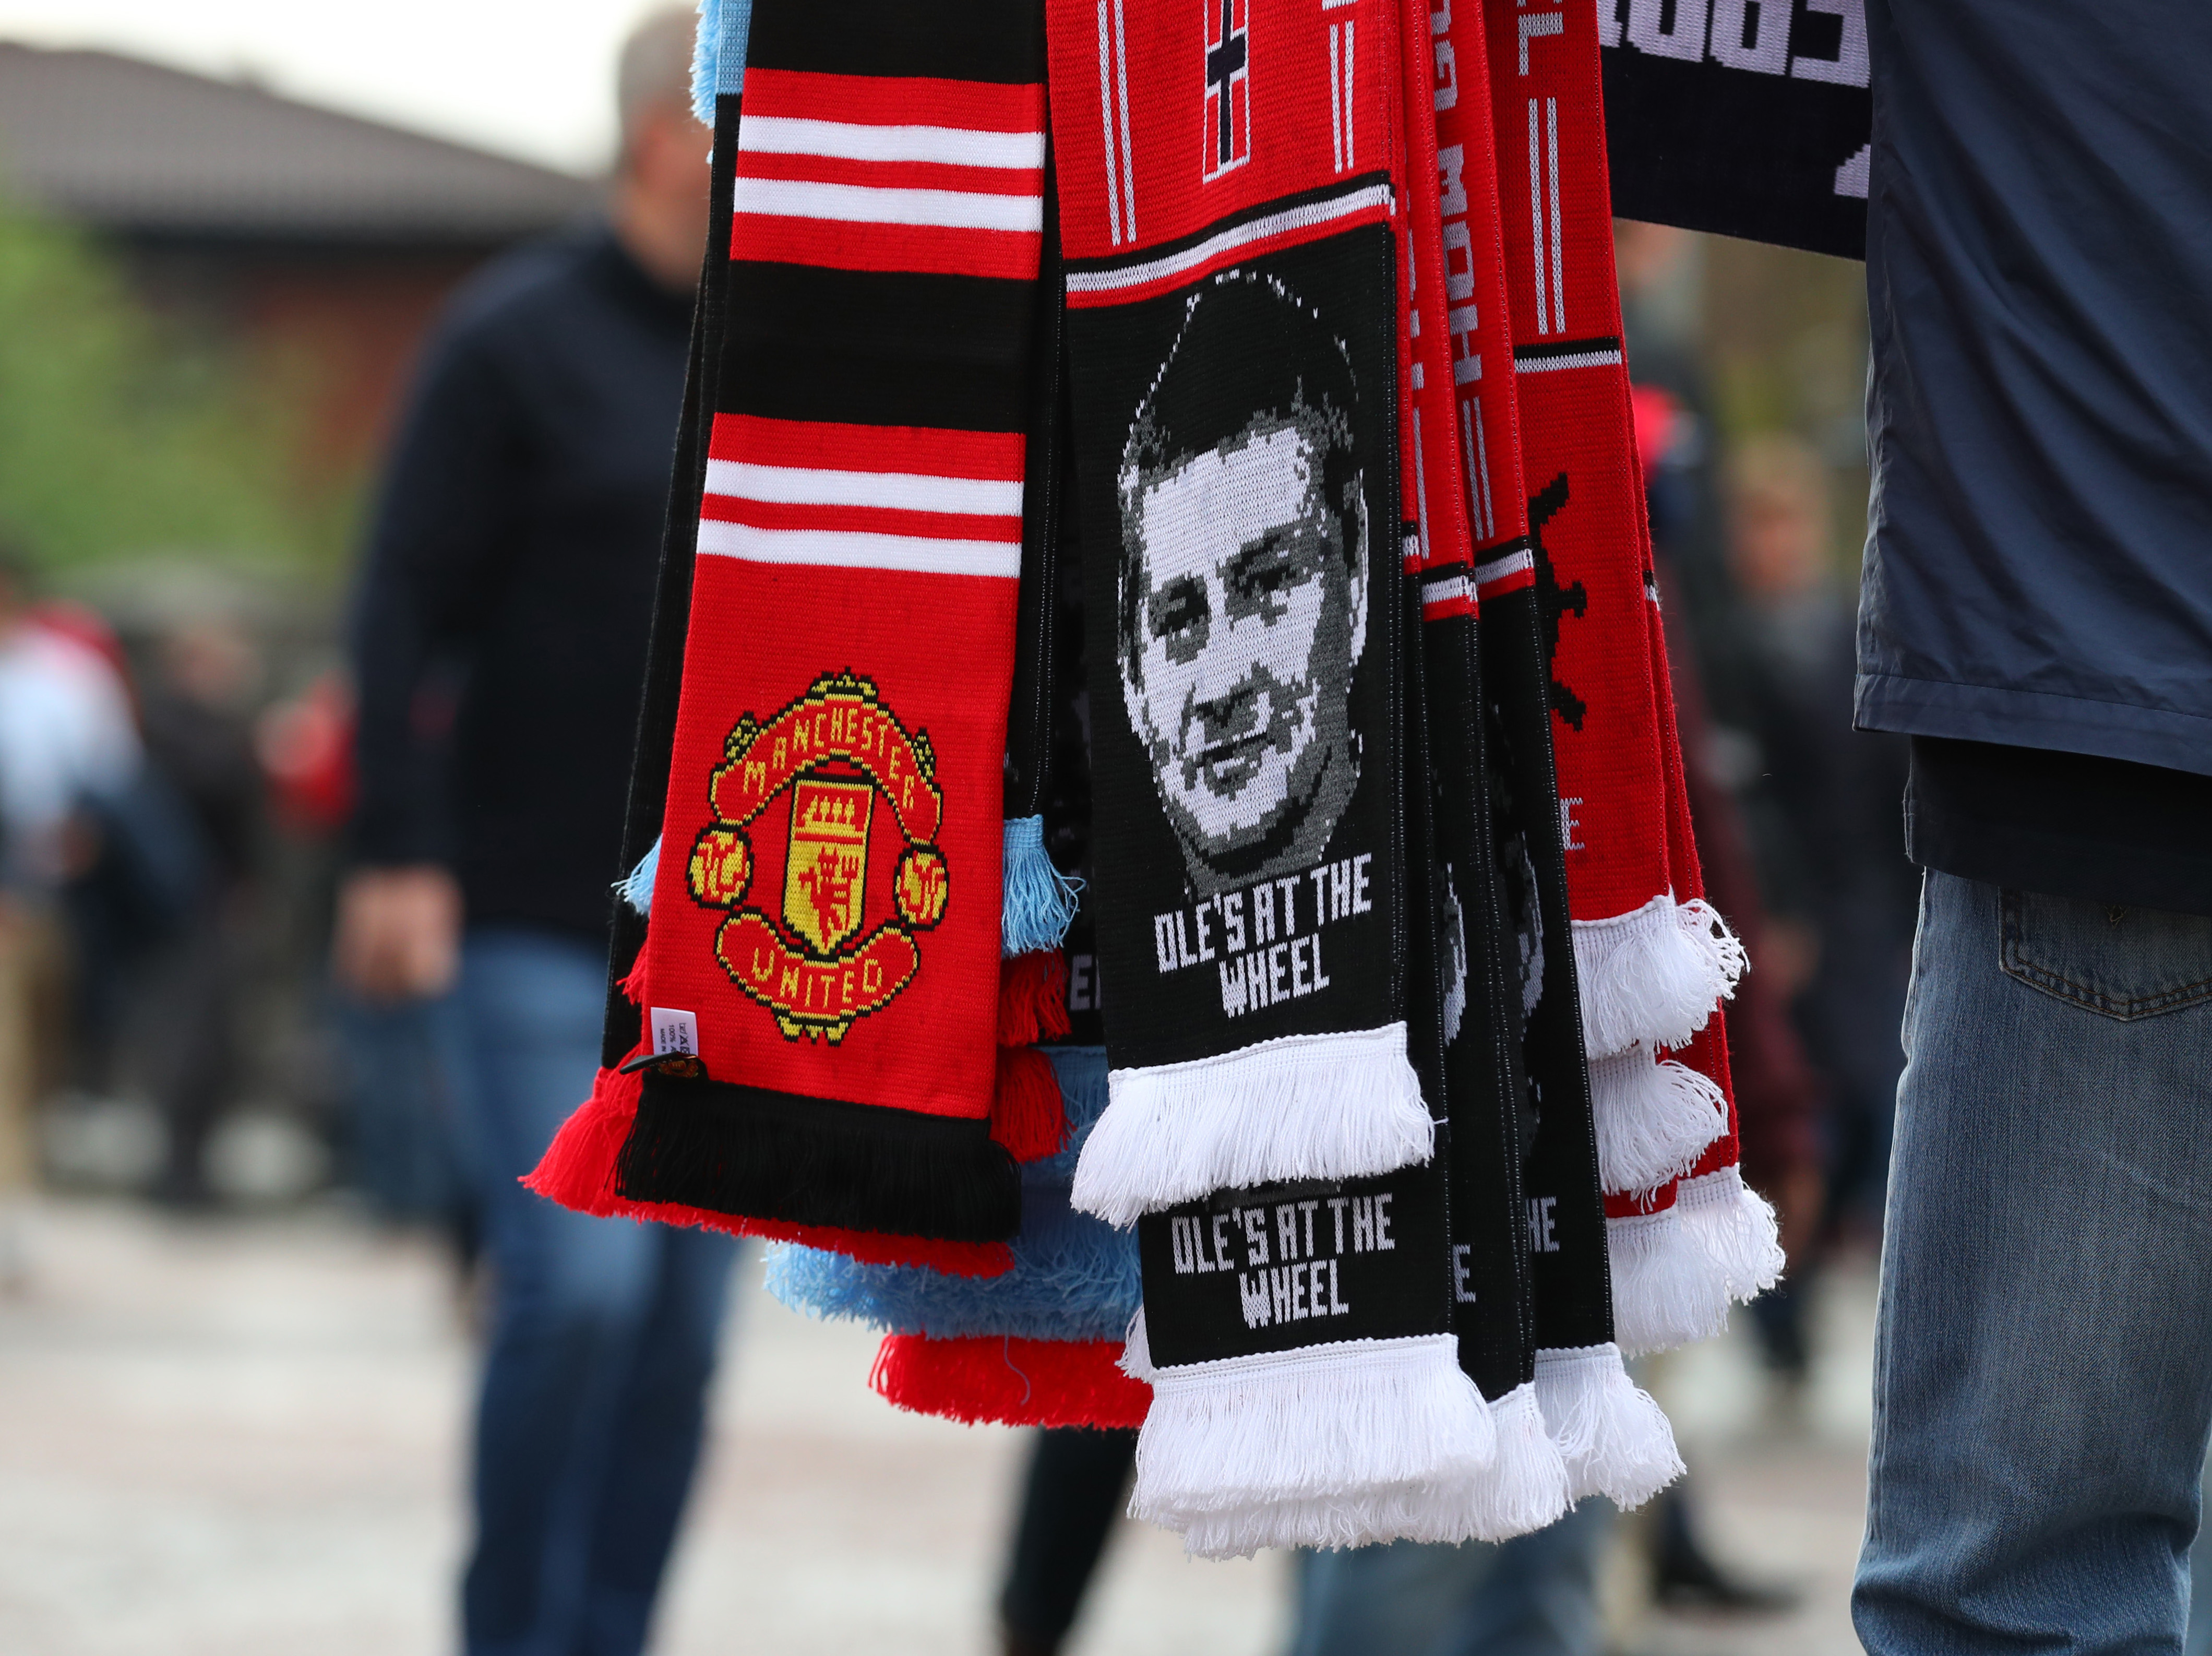 MANCHESTER, ENGLAND - APRIL 24: A Manchester United scarf with an image of Ole Gunnar Solskjaer manager of Manchester United ahead of the Premier League match between Manchester United and Manchester City at Old Trafford on April 24, 2019 in Manchester, United Kingdom. (Photo by Catherine Ivill/Getty Images)